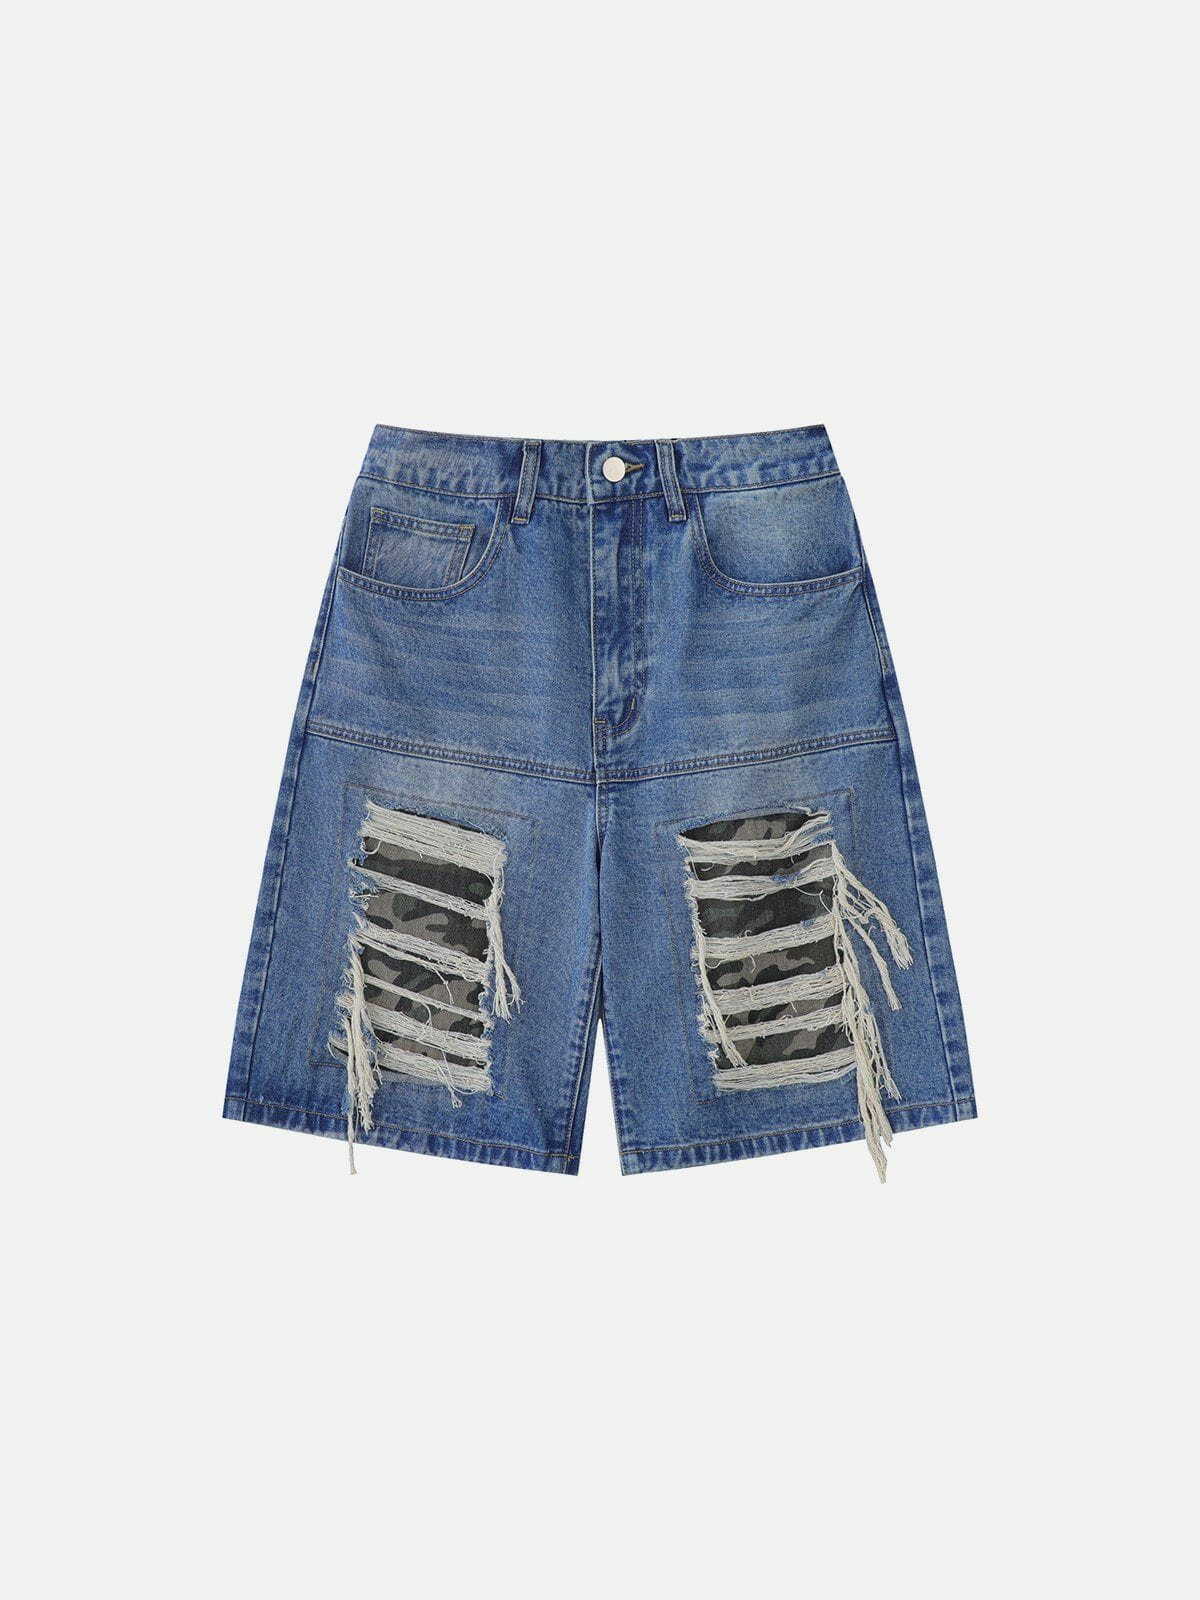 edgy camouflage jorts with fake hole patch   urban trend 1489